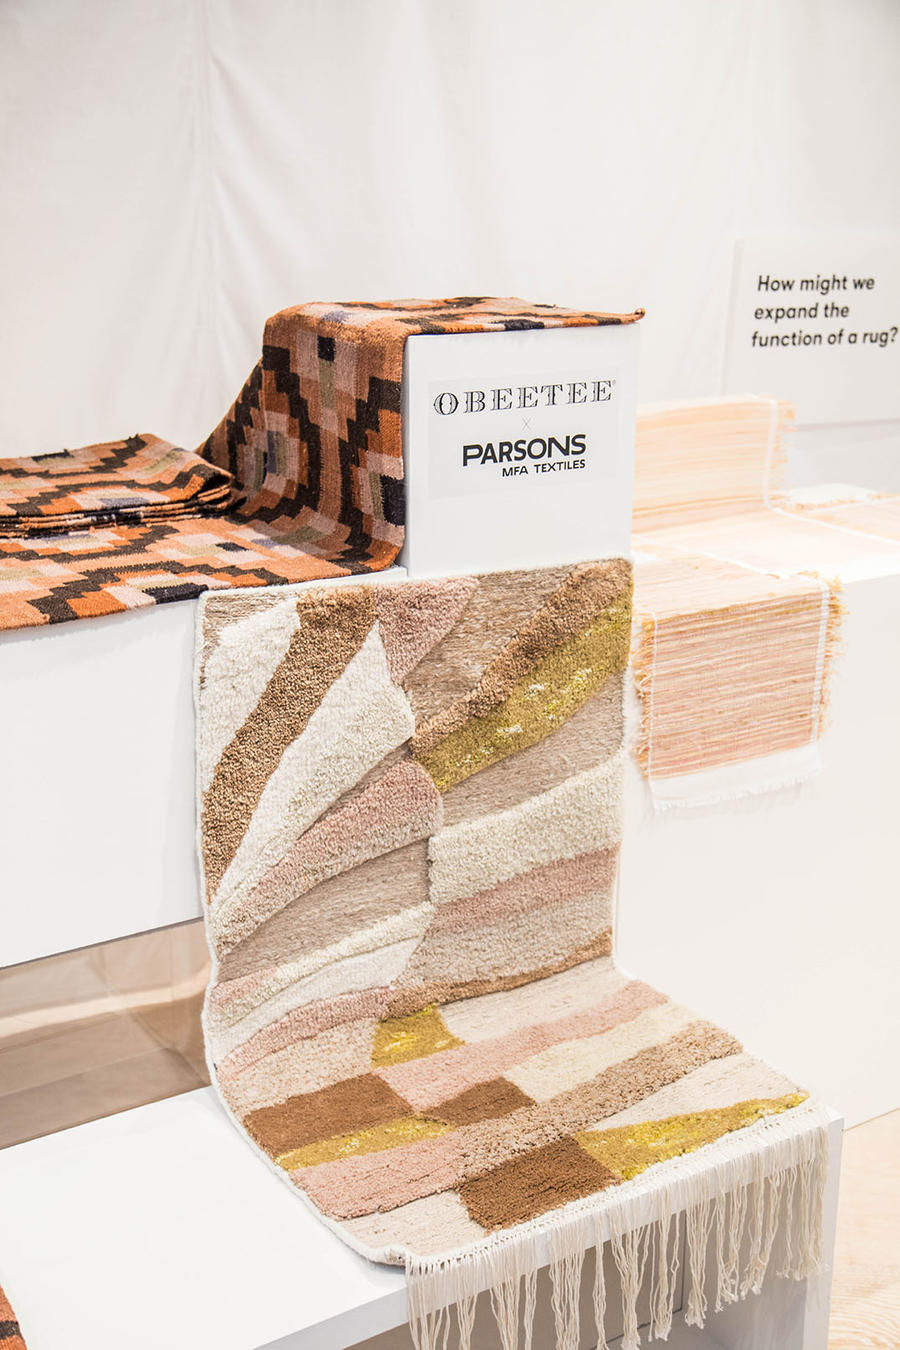 The exhibition of the Obeetee rugs that Parsons students designed.